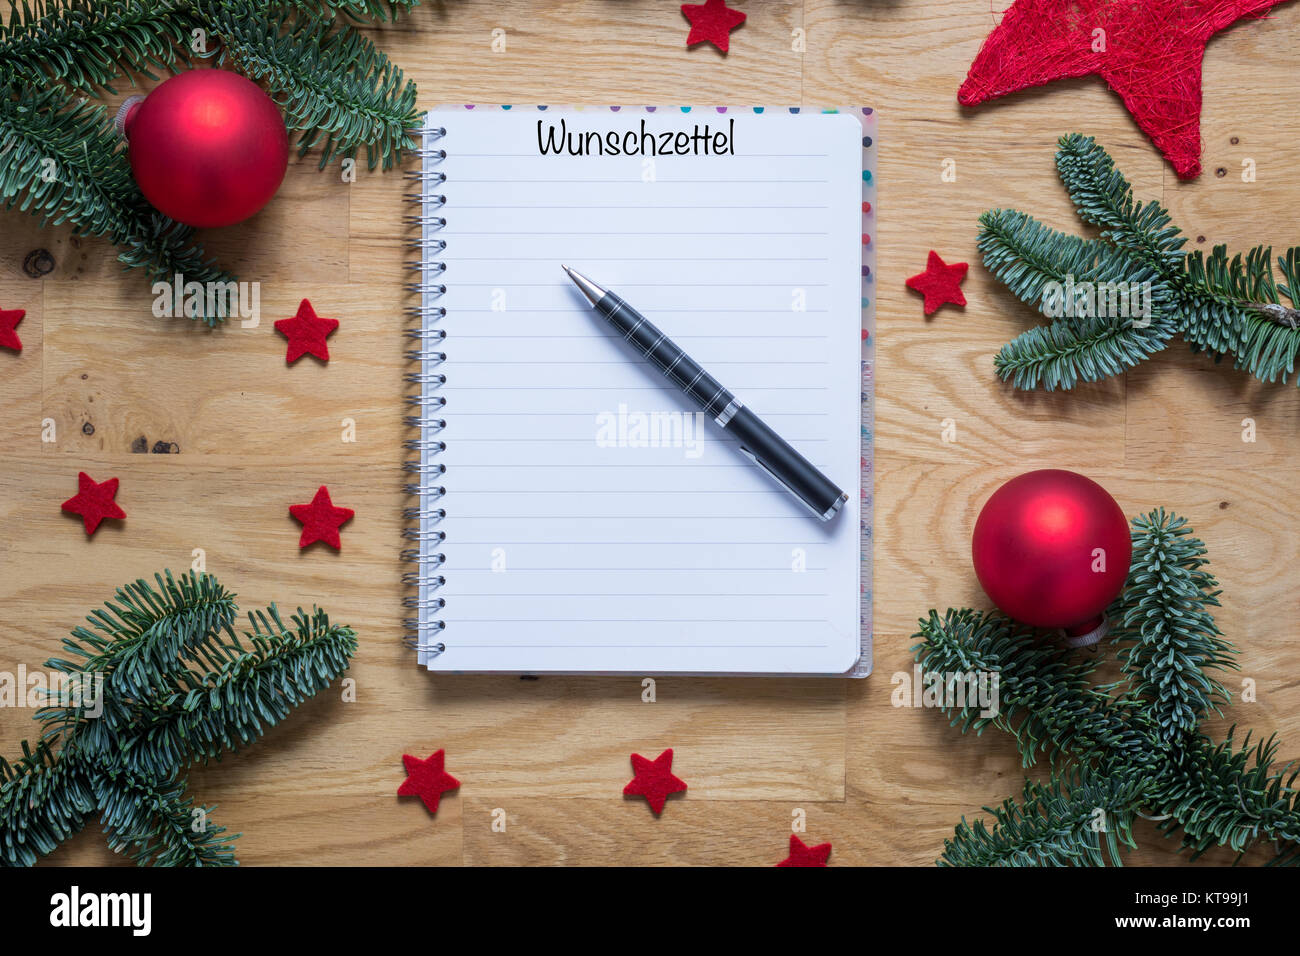 Wish list for Christmas in German on a notepad with Christmas ...